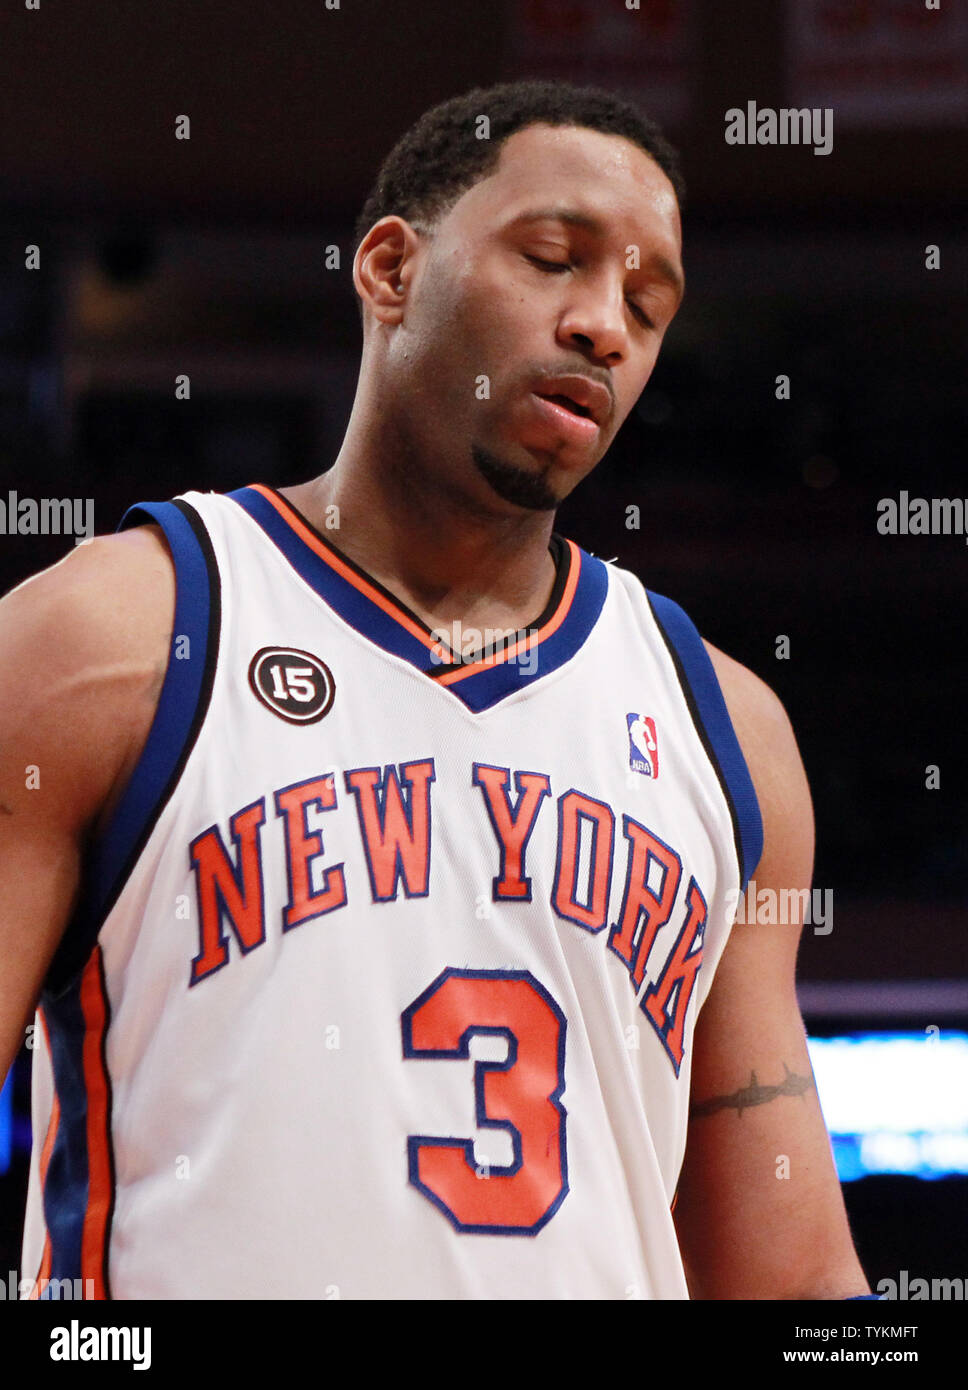 Tracy McGrady Believes New York Knicks 'Trending in the Right